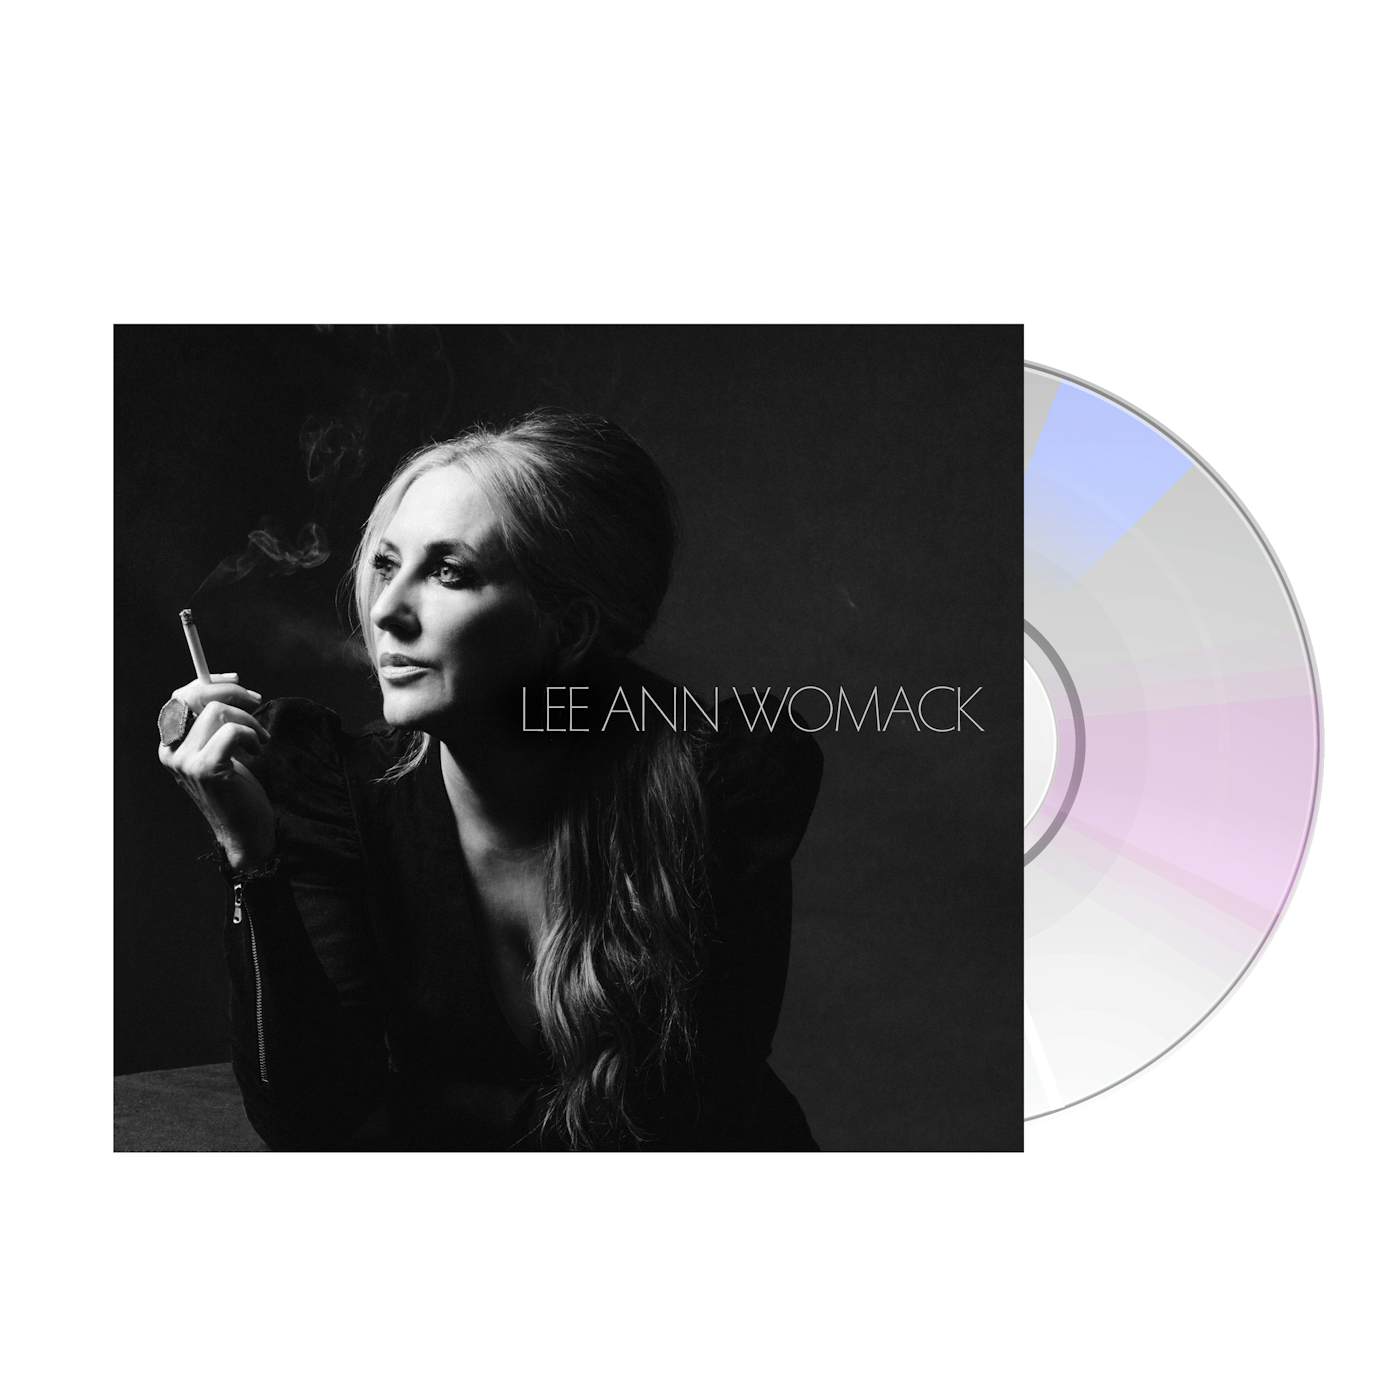 Lee Ann Womack - The Lonely, The Lonesome & The Gone CD